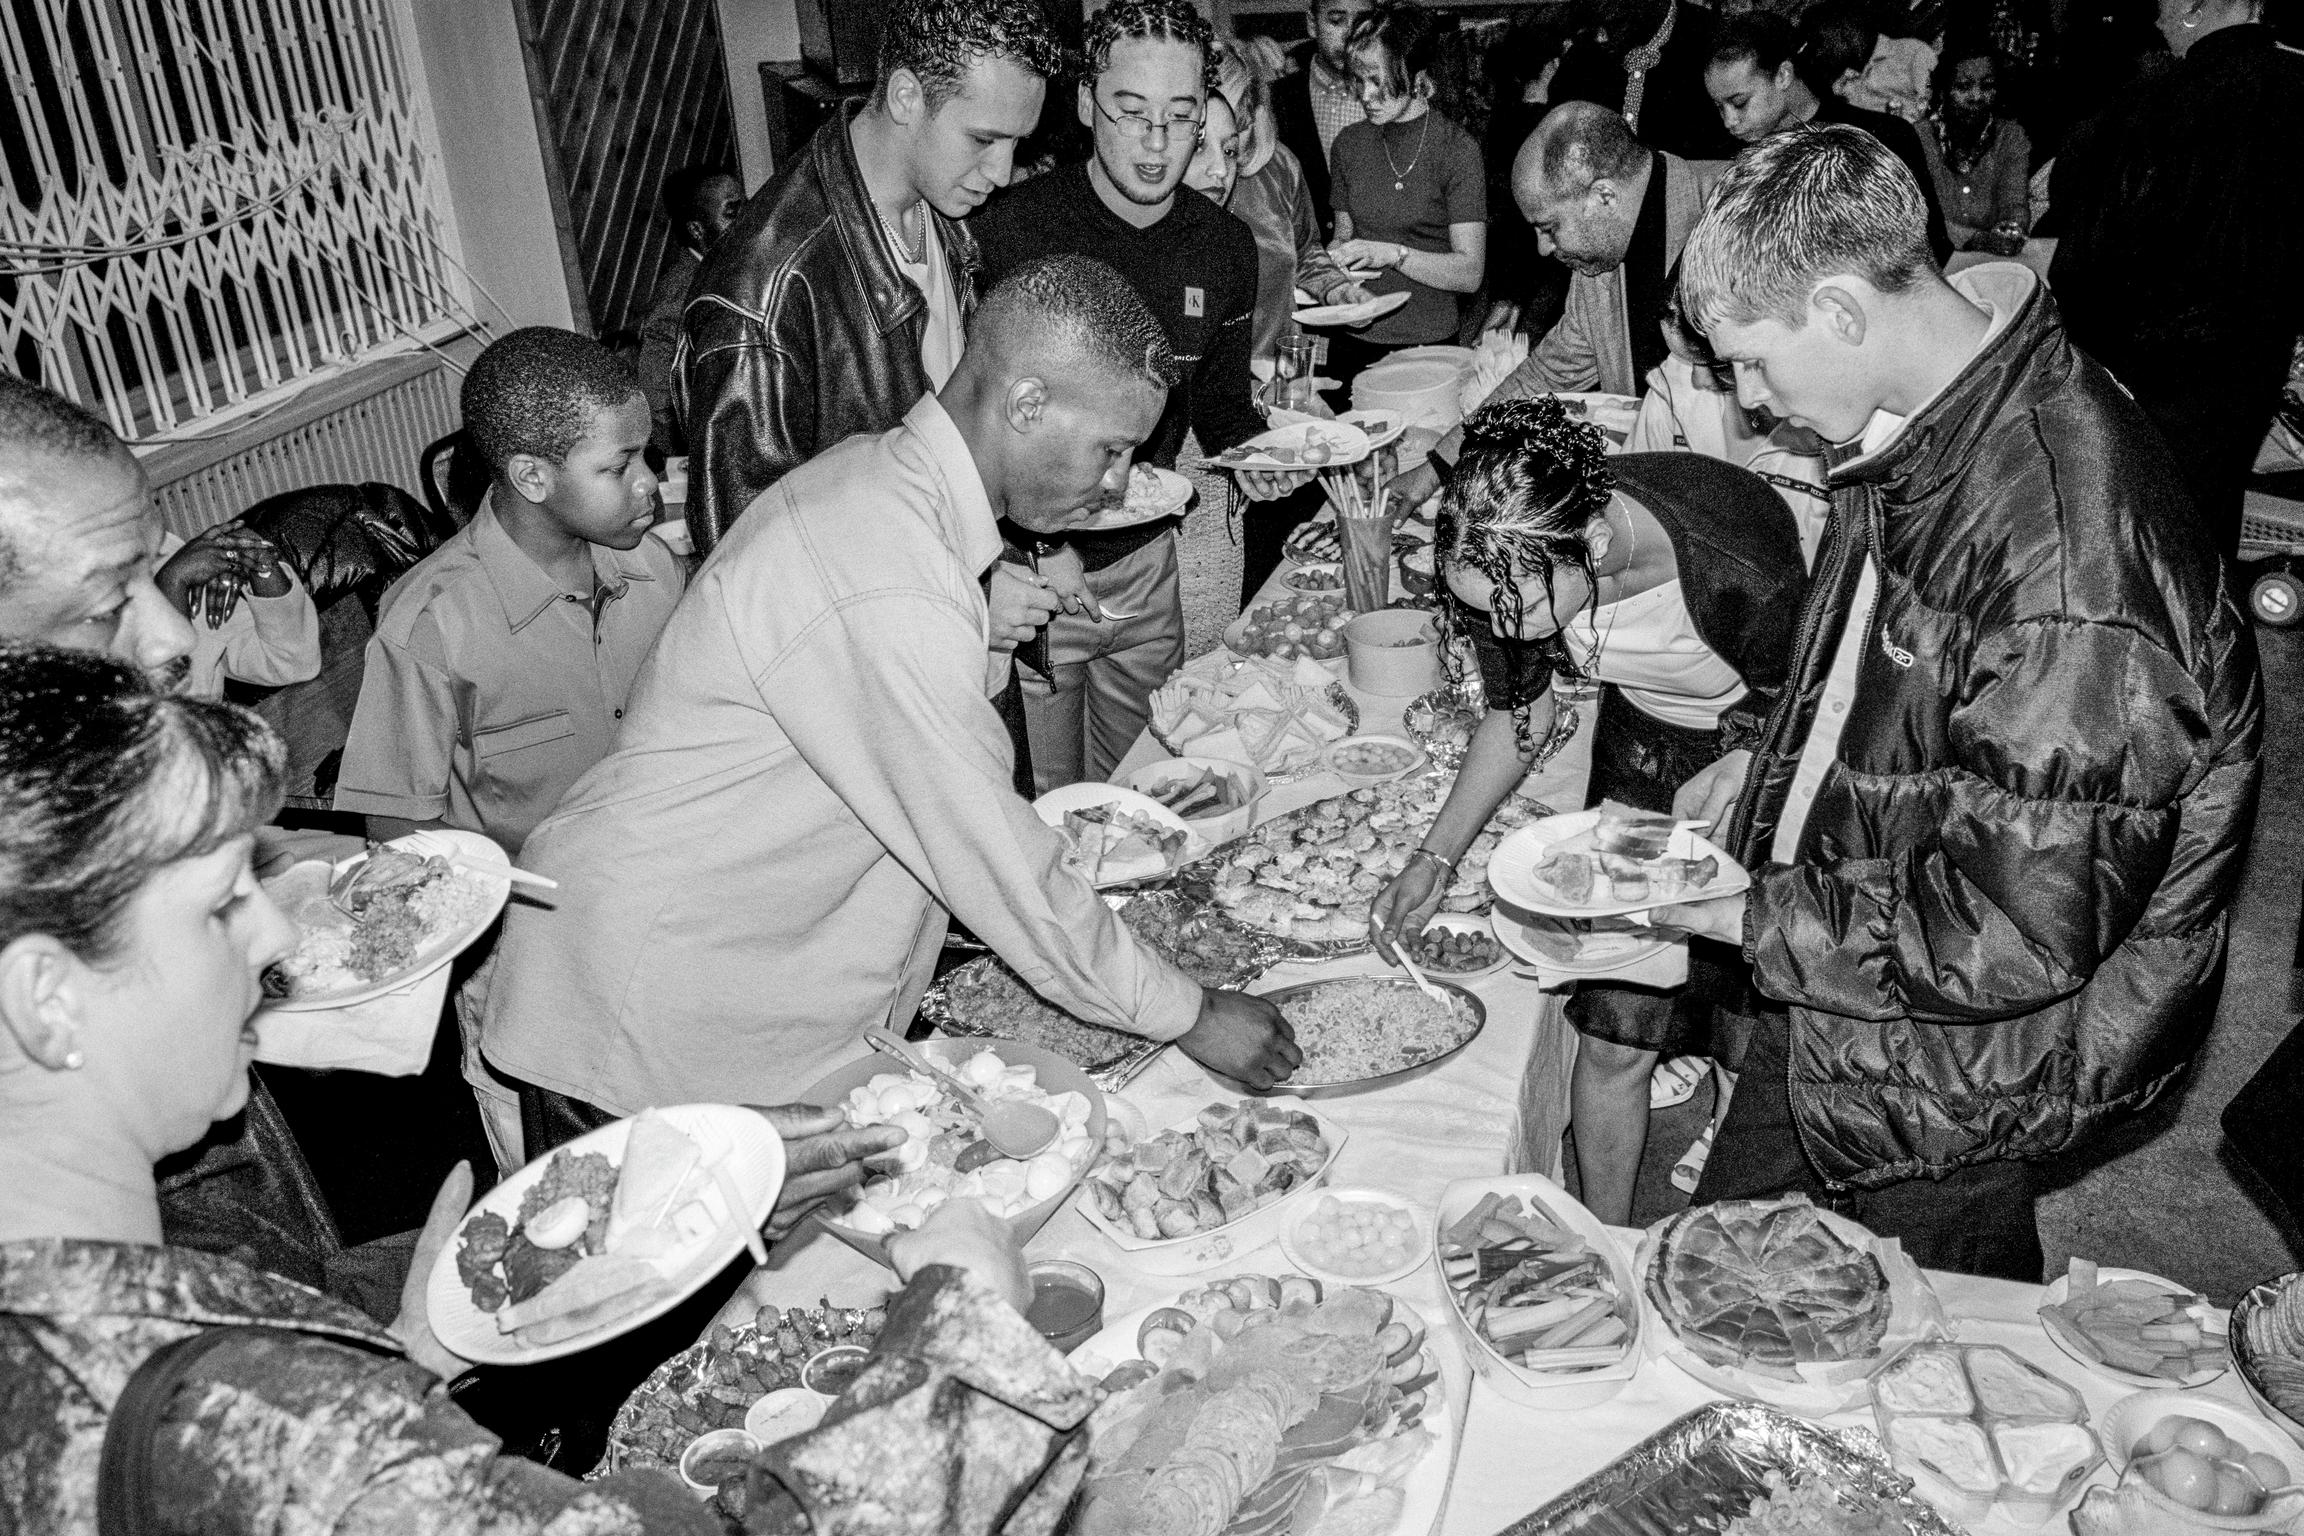 Food (multi-cultural) at a party after a Baptism held at Butetown Community Centre. Cardiff, Wales